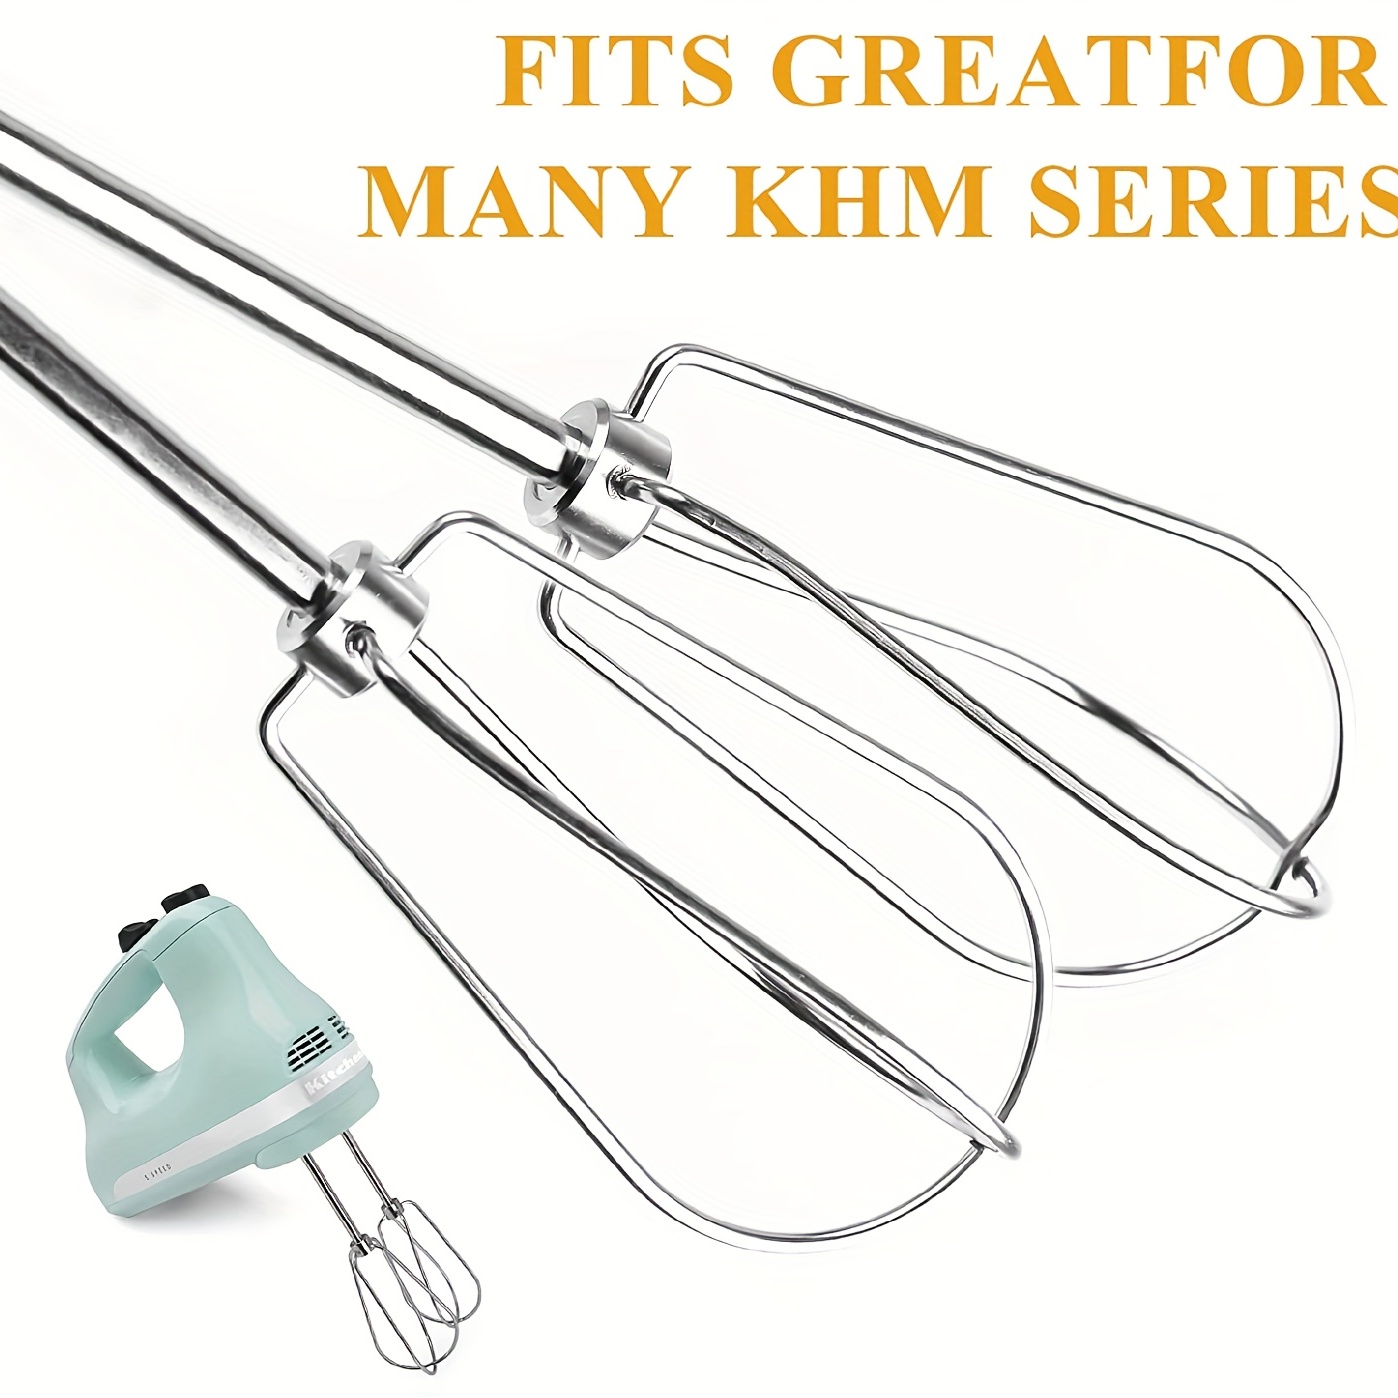 W10490648 Hand Mixer Attachment Beaters for KitchenAid KHM2B, AP5644233,  PS4082859 Replacements.